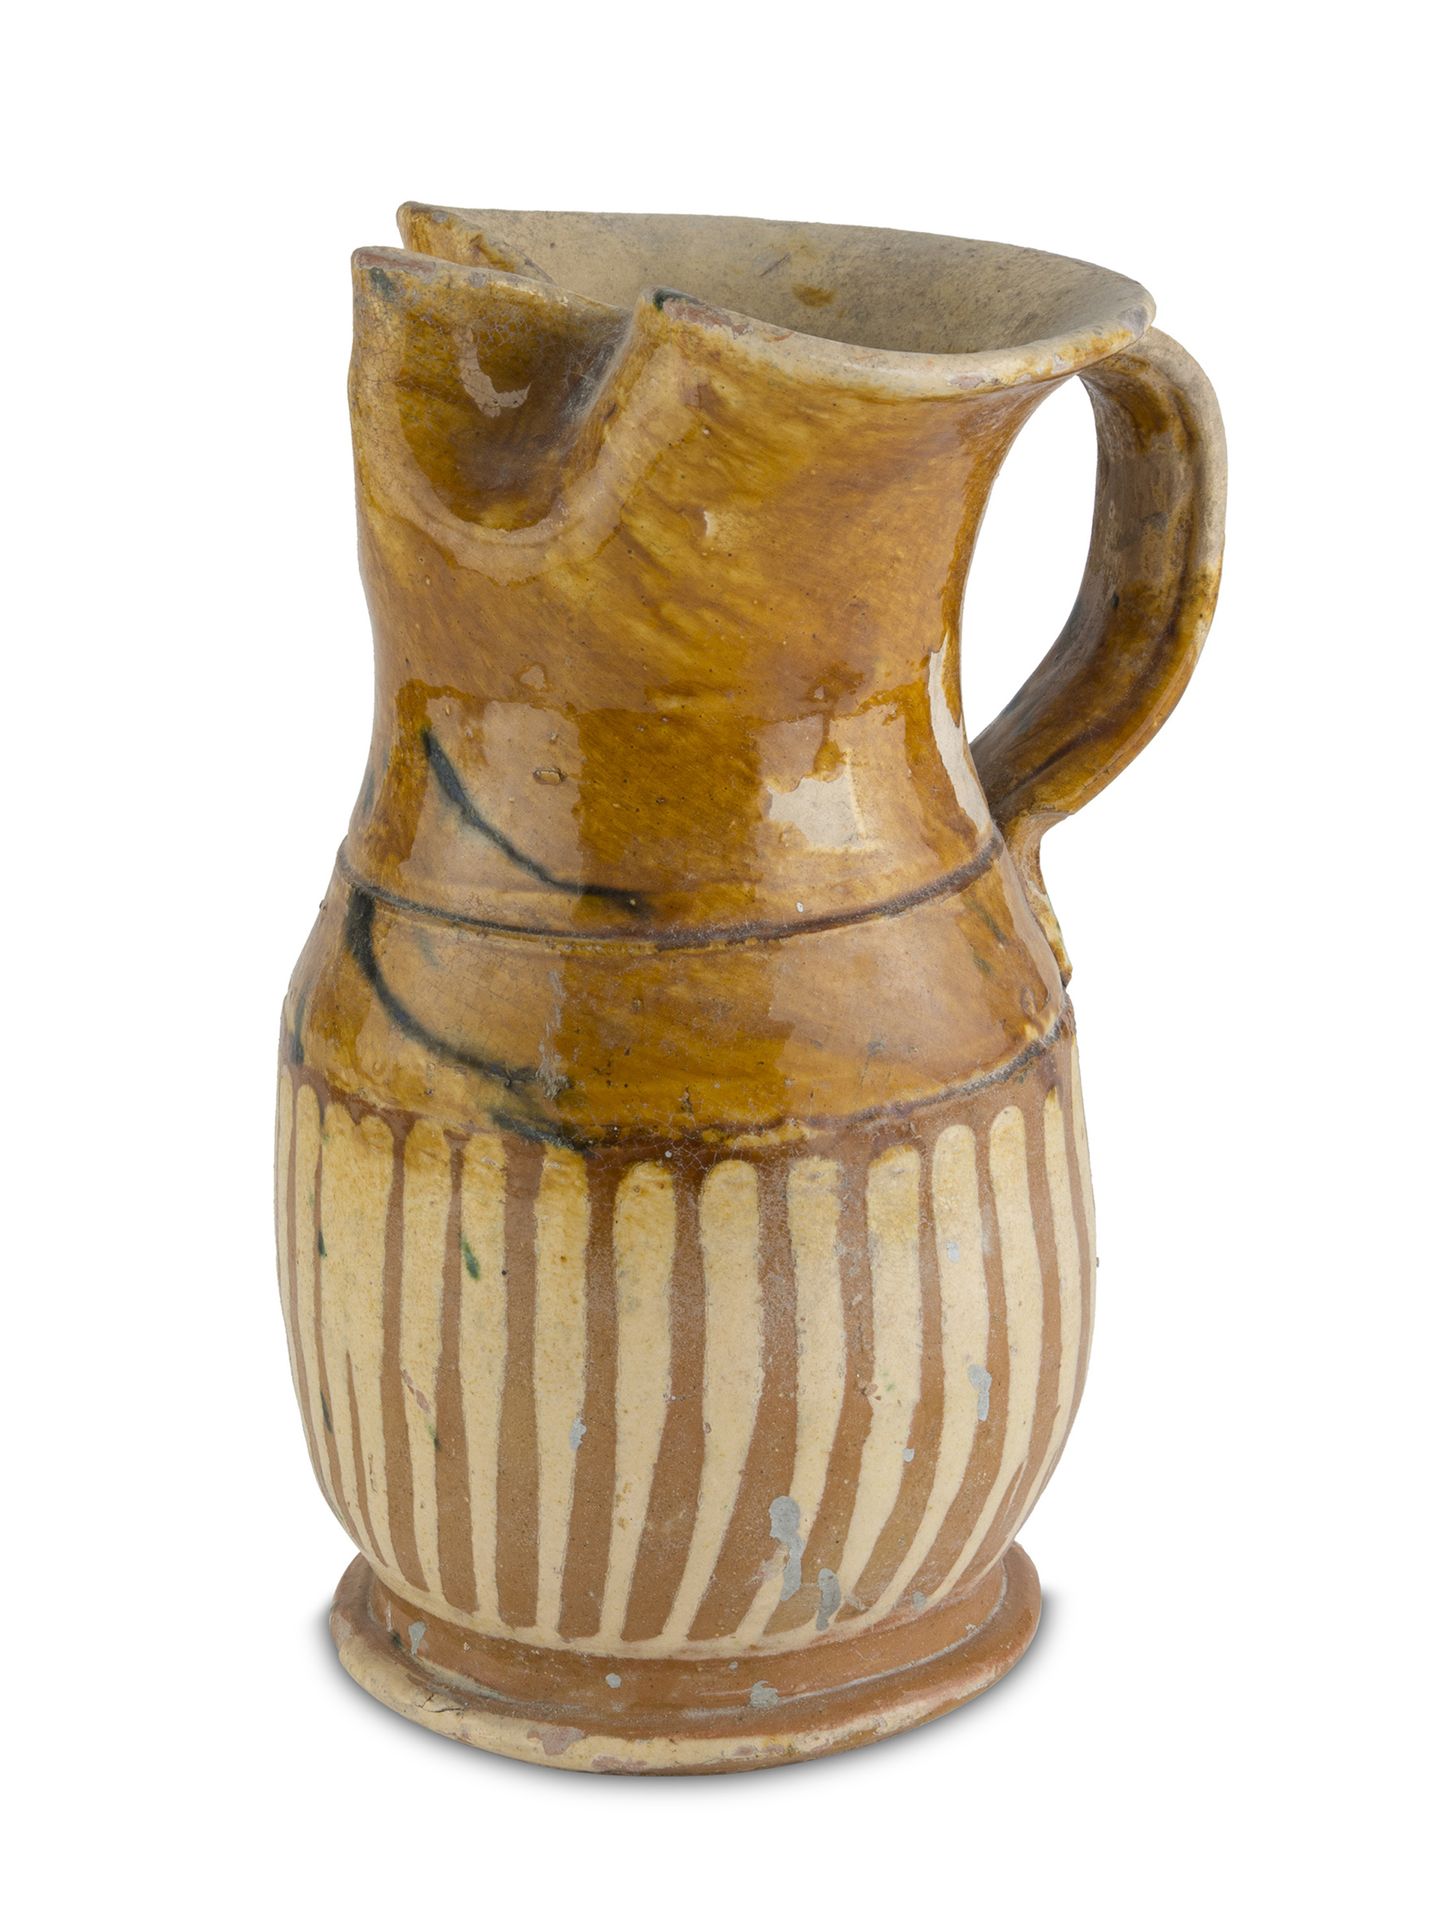 Null TERRACOTTA PITCHER CALABRIA LATE 19TH CENTURY